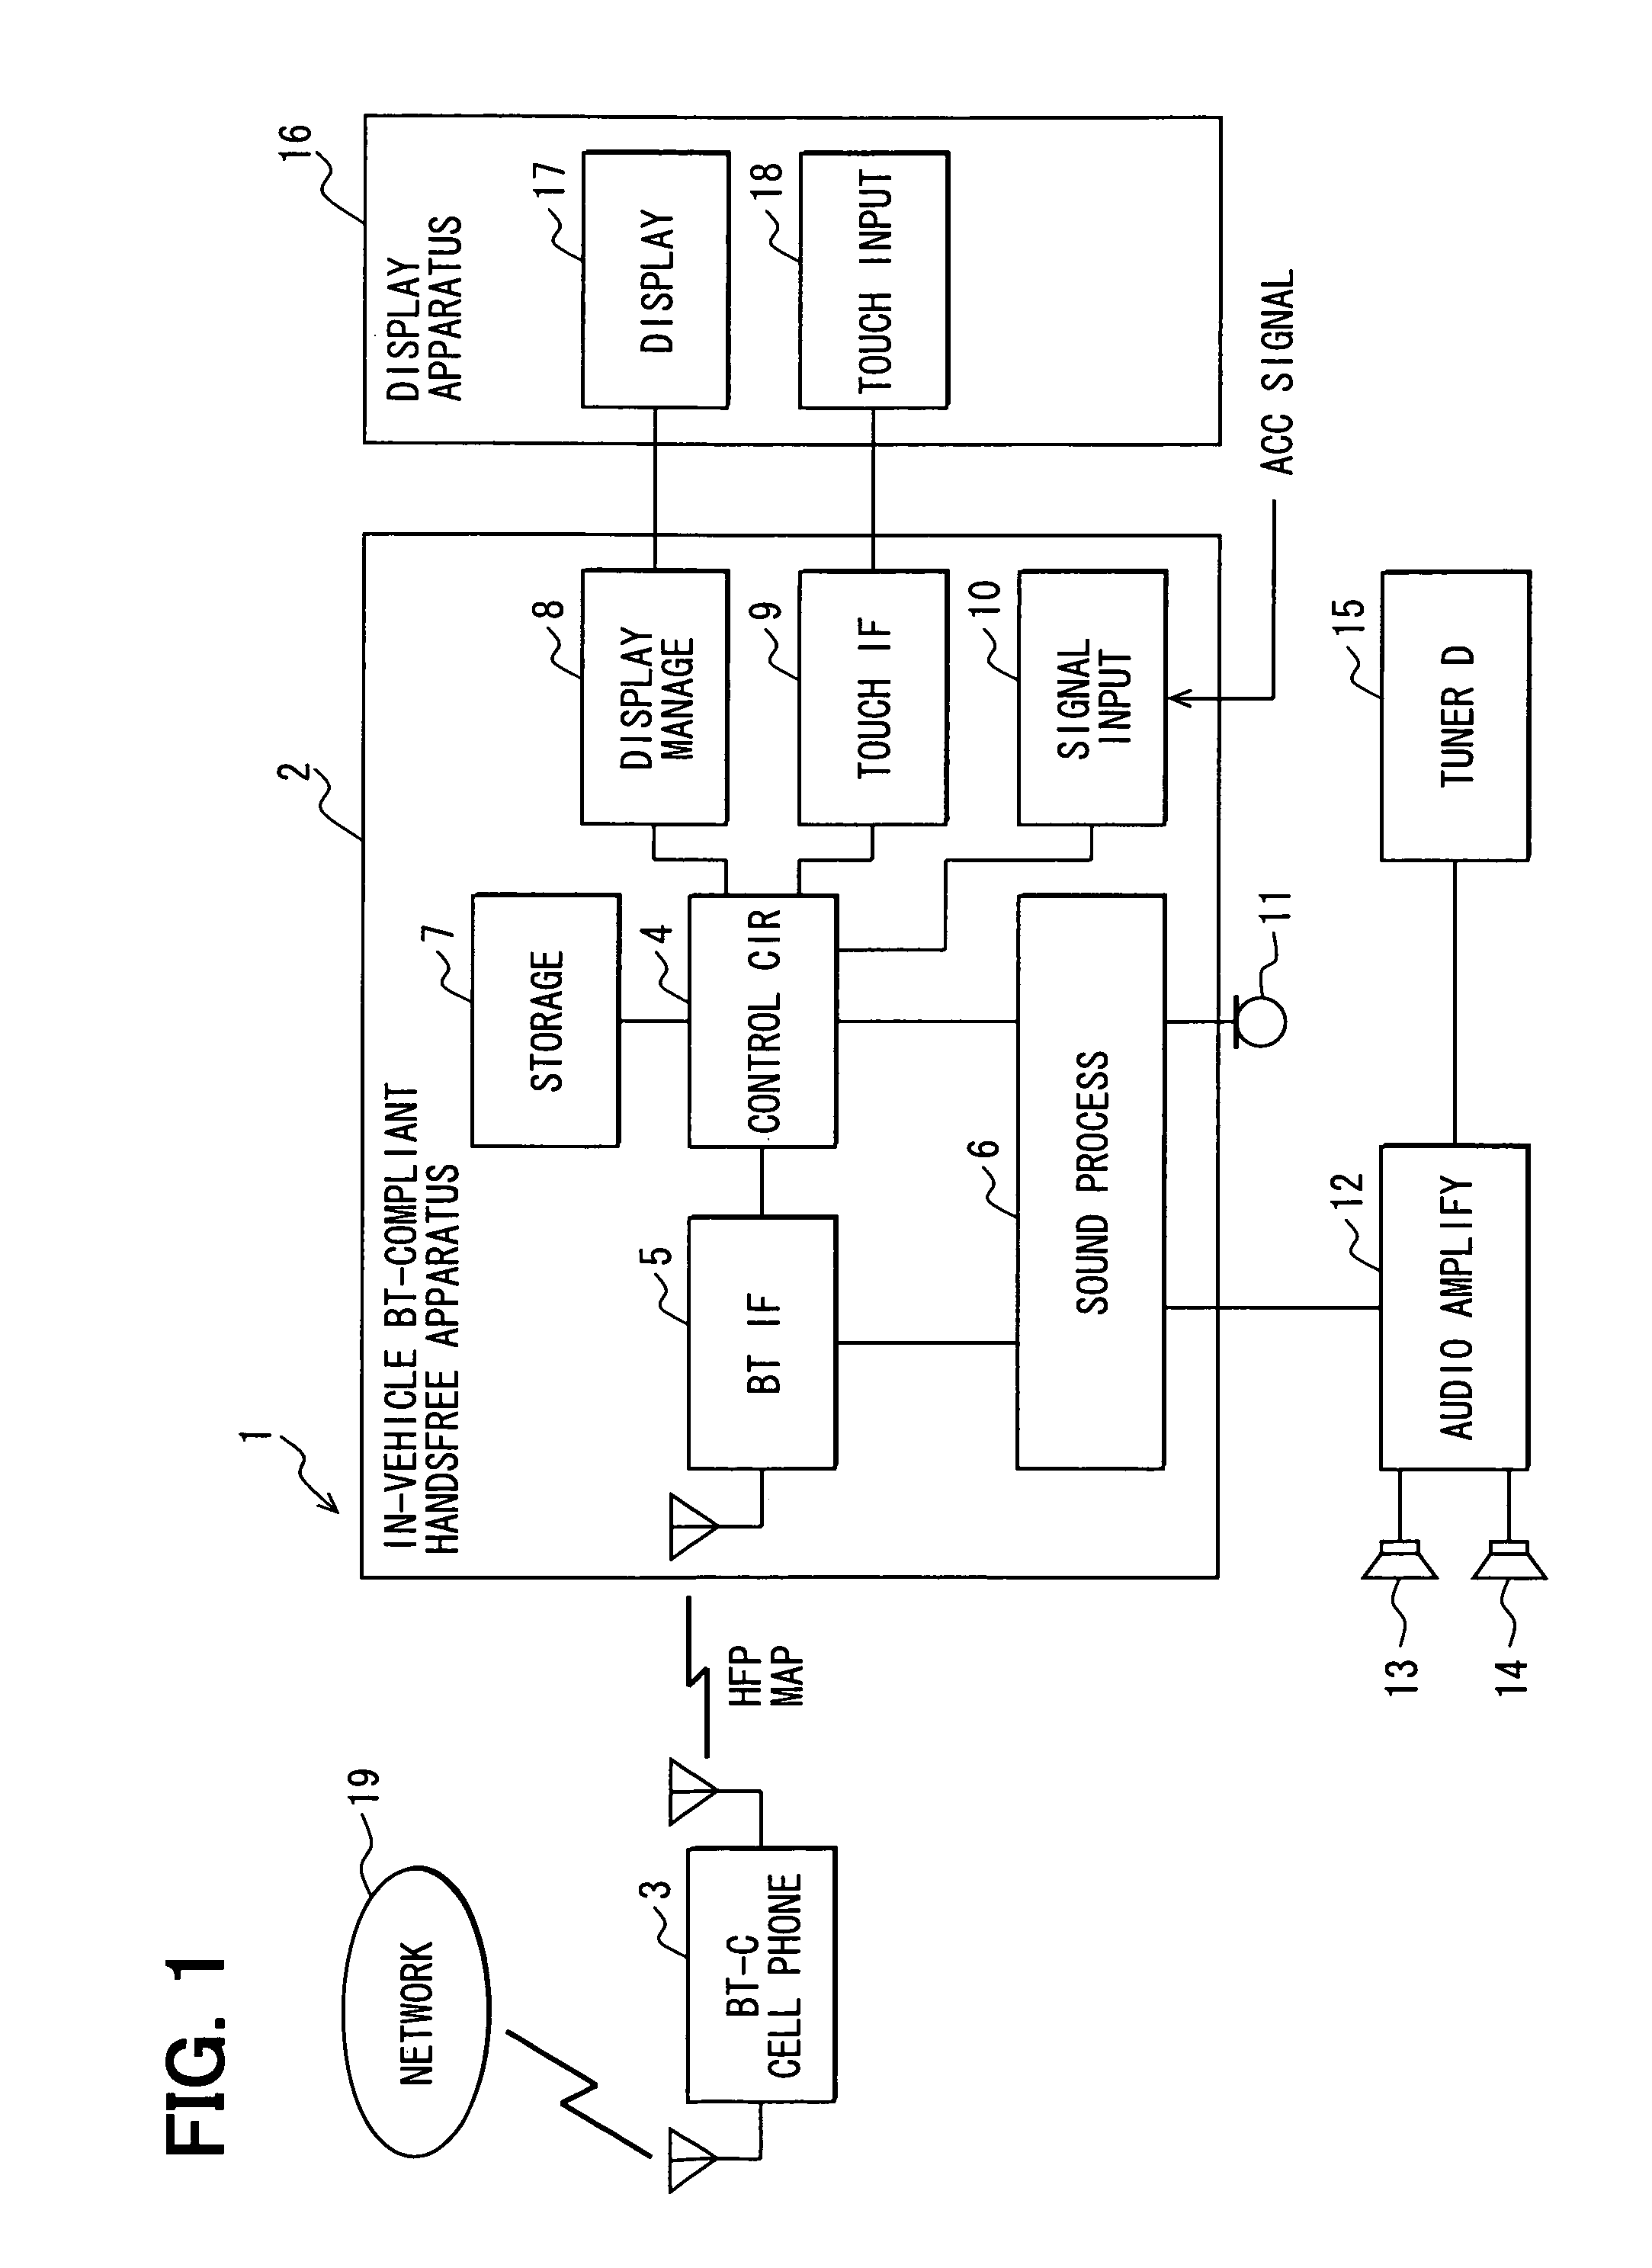 Mail operation apparatus with short range wireless communications function